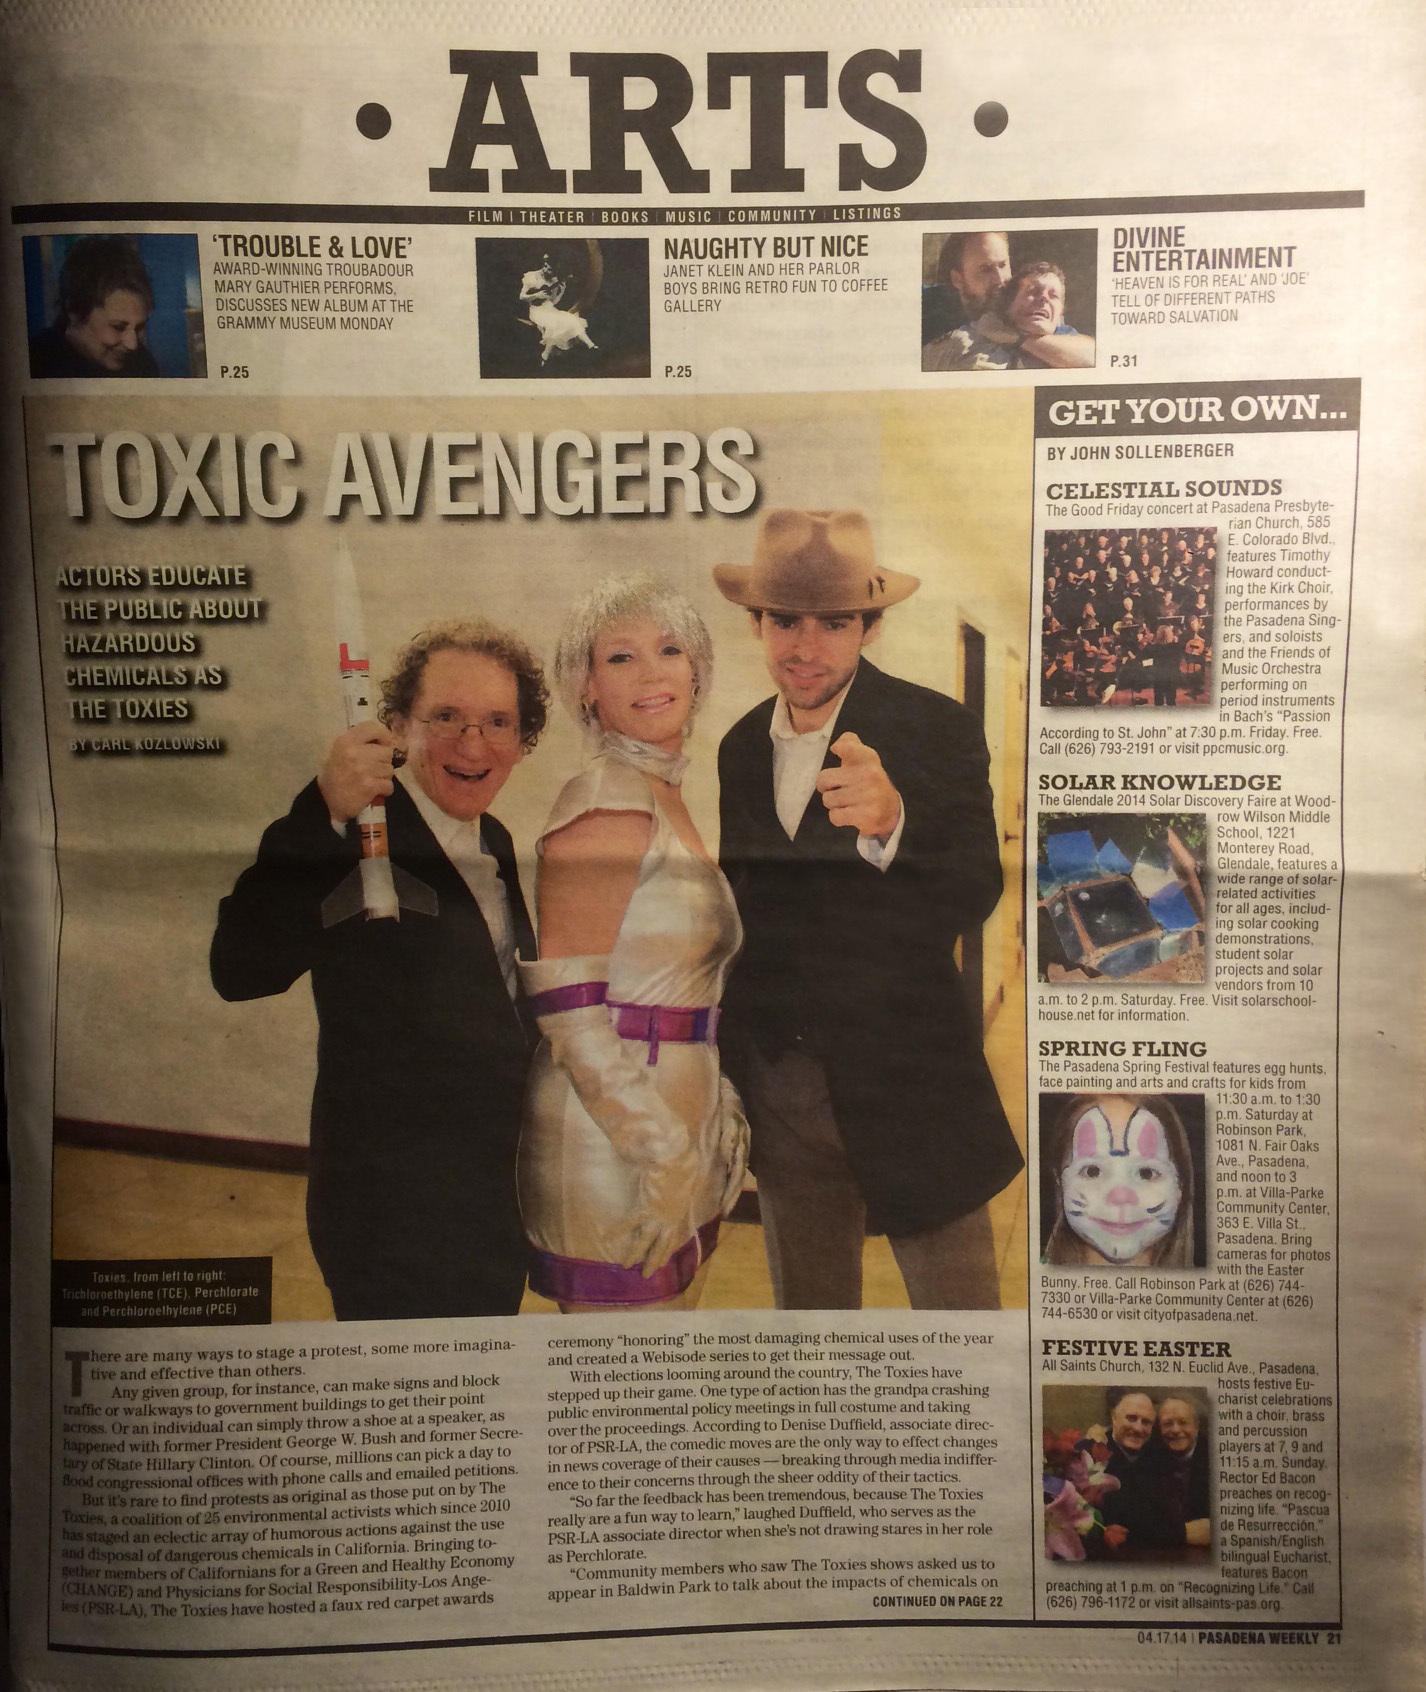 The Toxies, from left to right: Trichloroethylene (Holland MacFallister), Perchlorate (Denise Duffield) and Perchloroethylene (Oliver Rayón). Pasadena Weekly. April 17th, 2014.